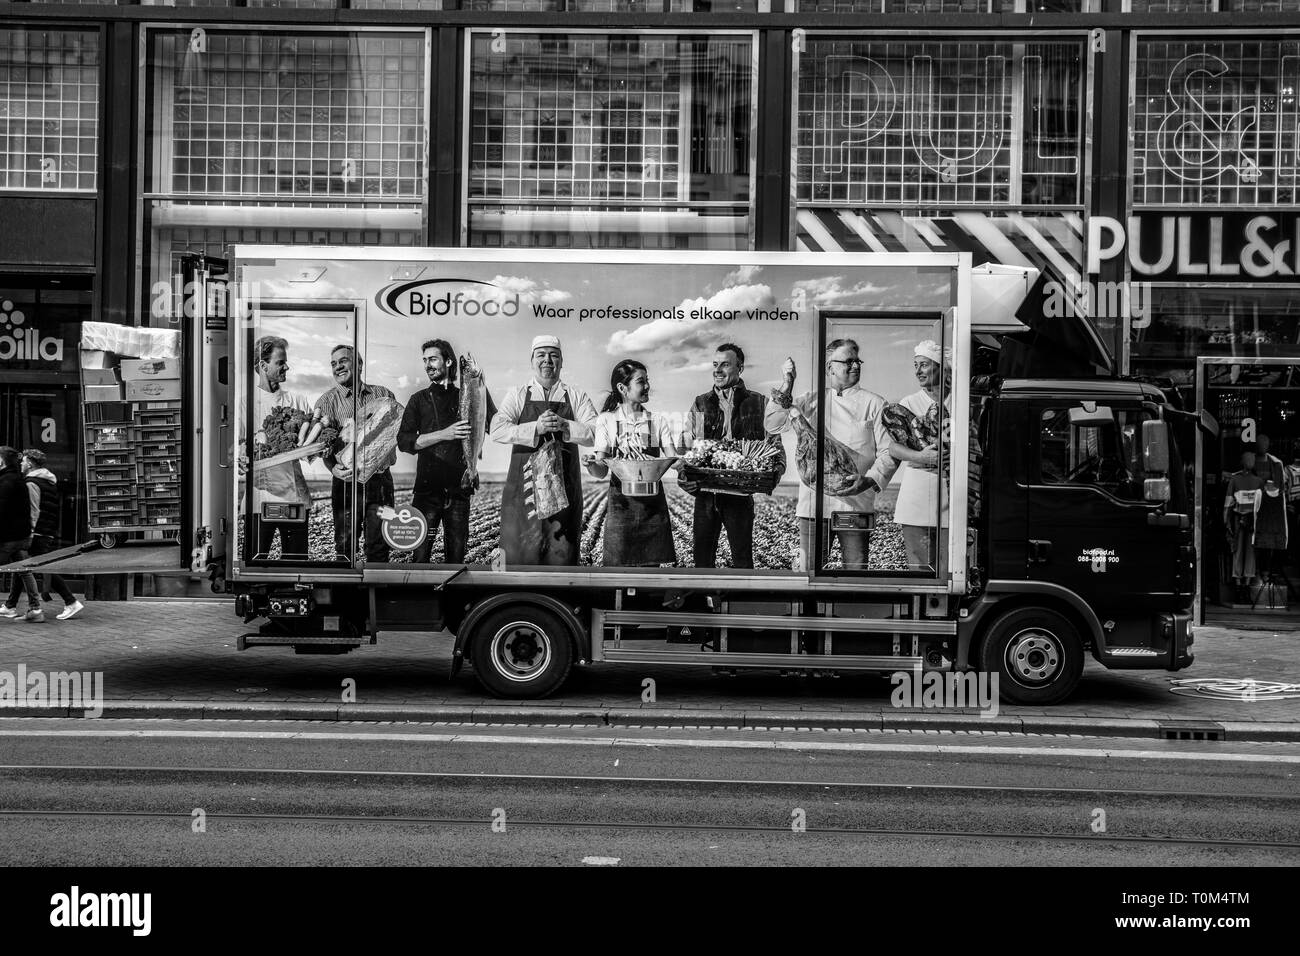 A Bidfood Truck At Amsterdam The Netherlands 2019 In Black And White Stock Photo